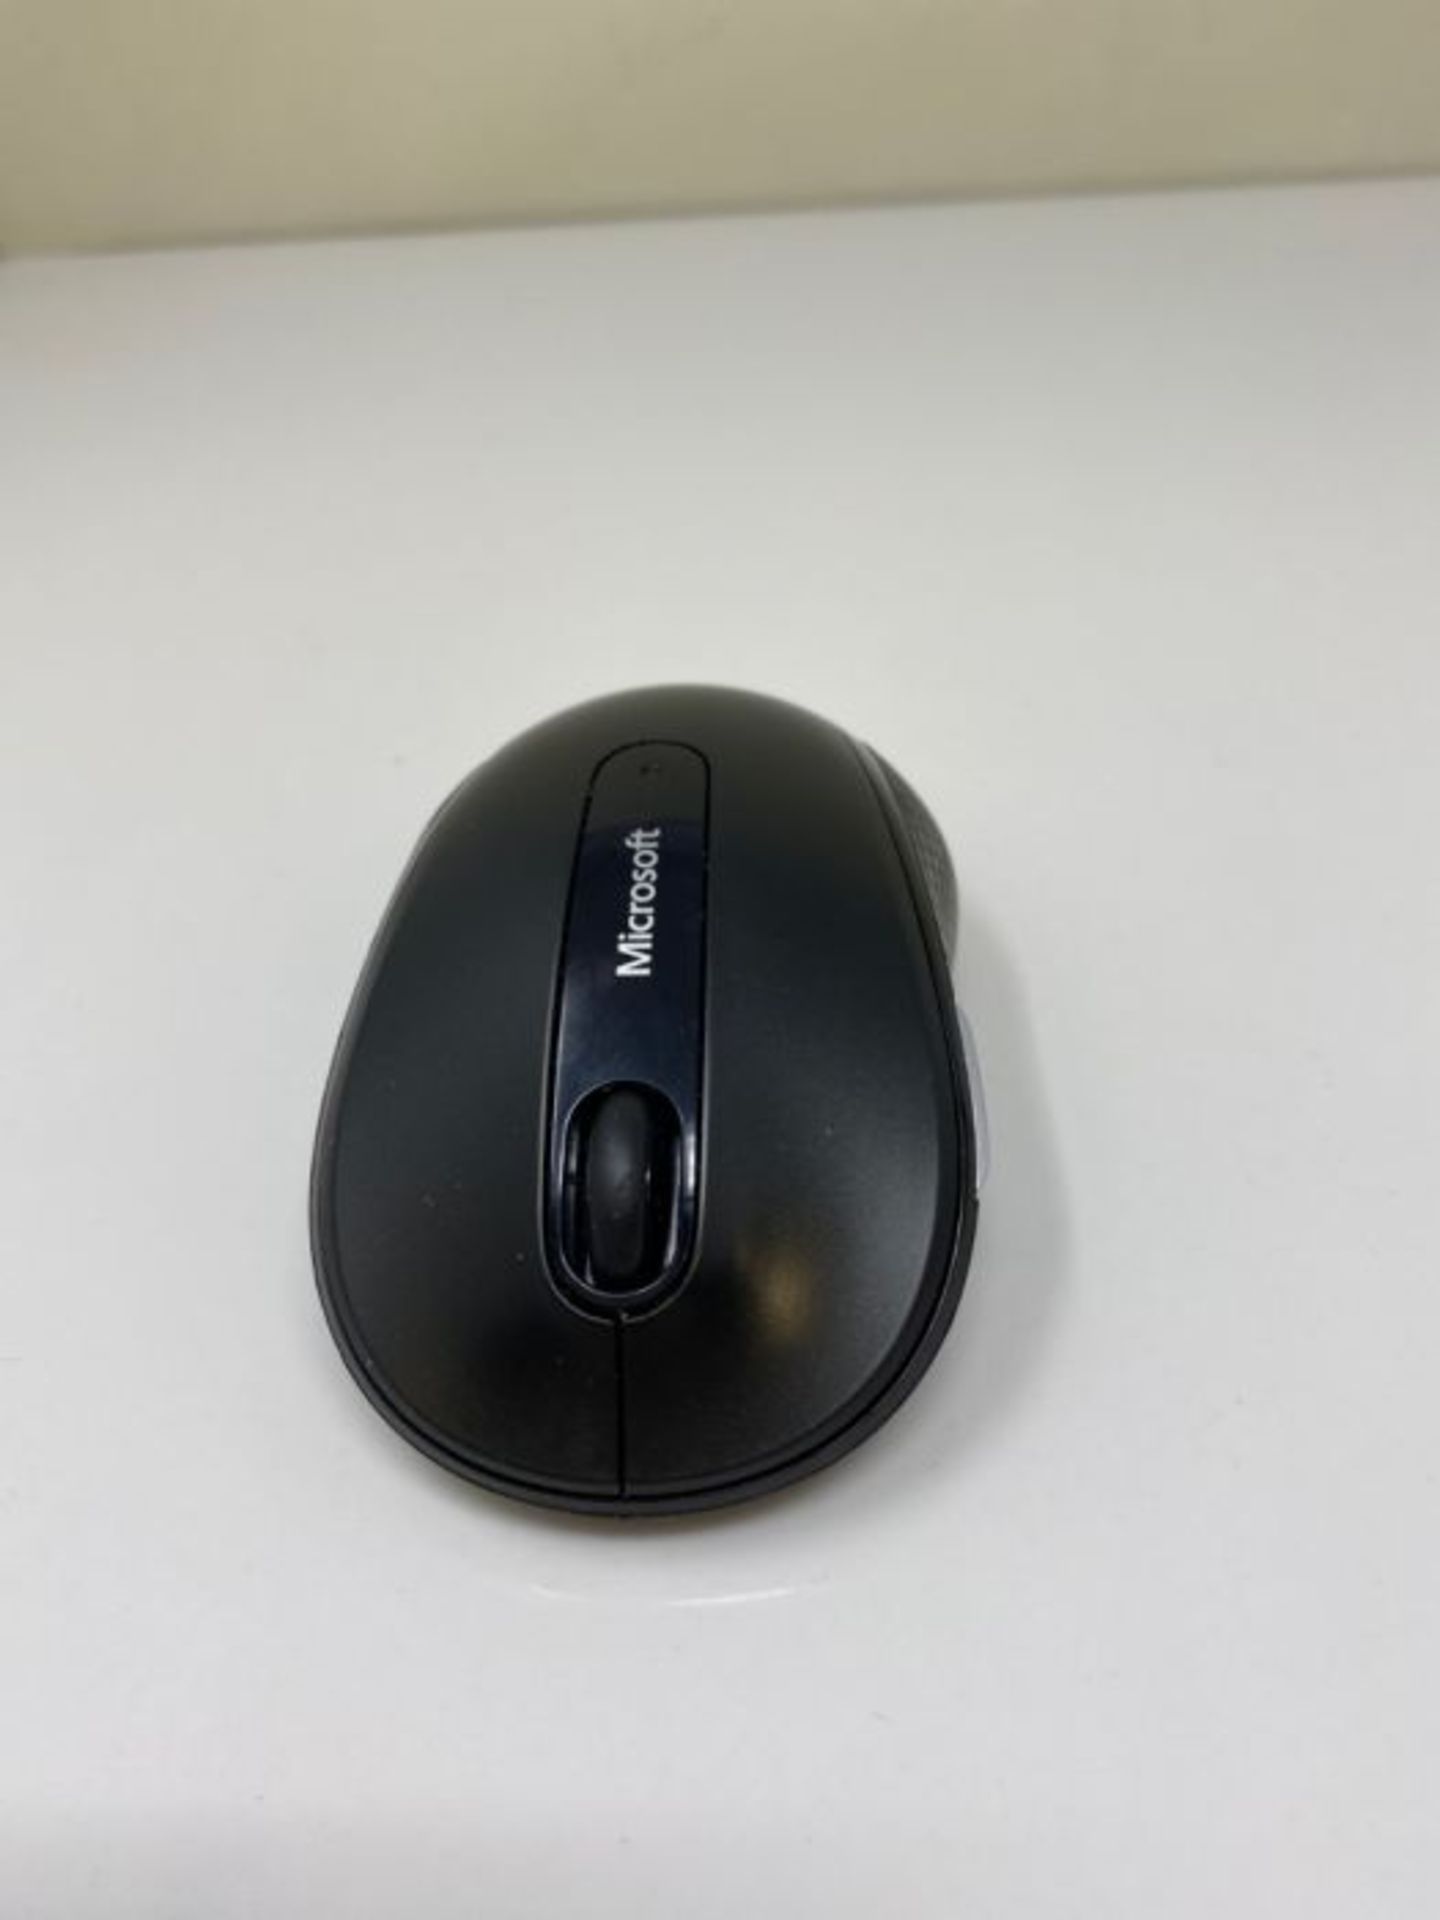 Microsoft D5D-00133 4000 Wireless Mobile Mouse - Image 2 of 2